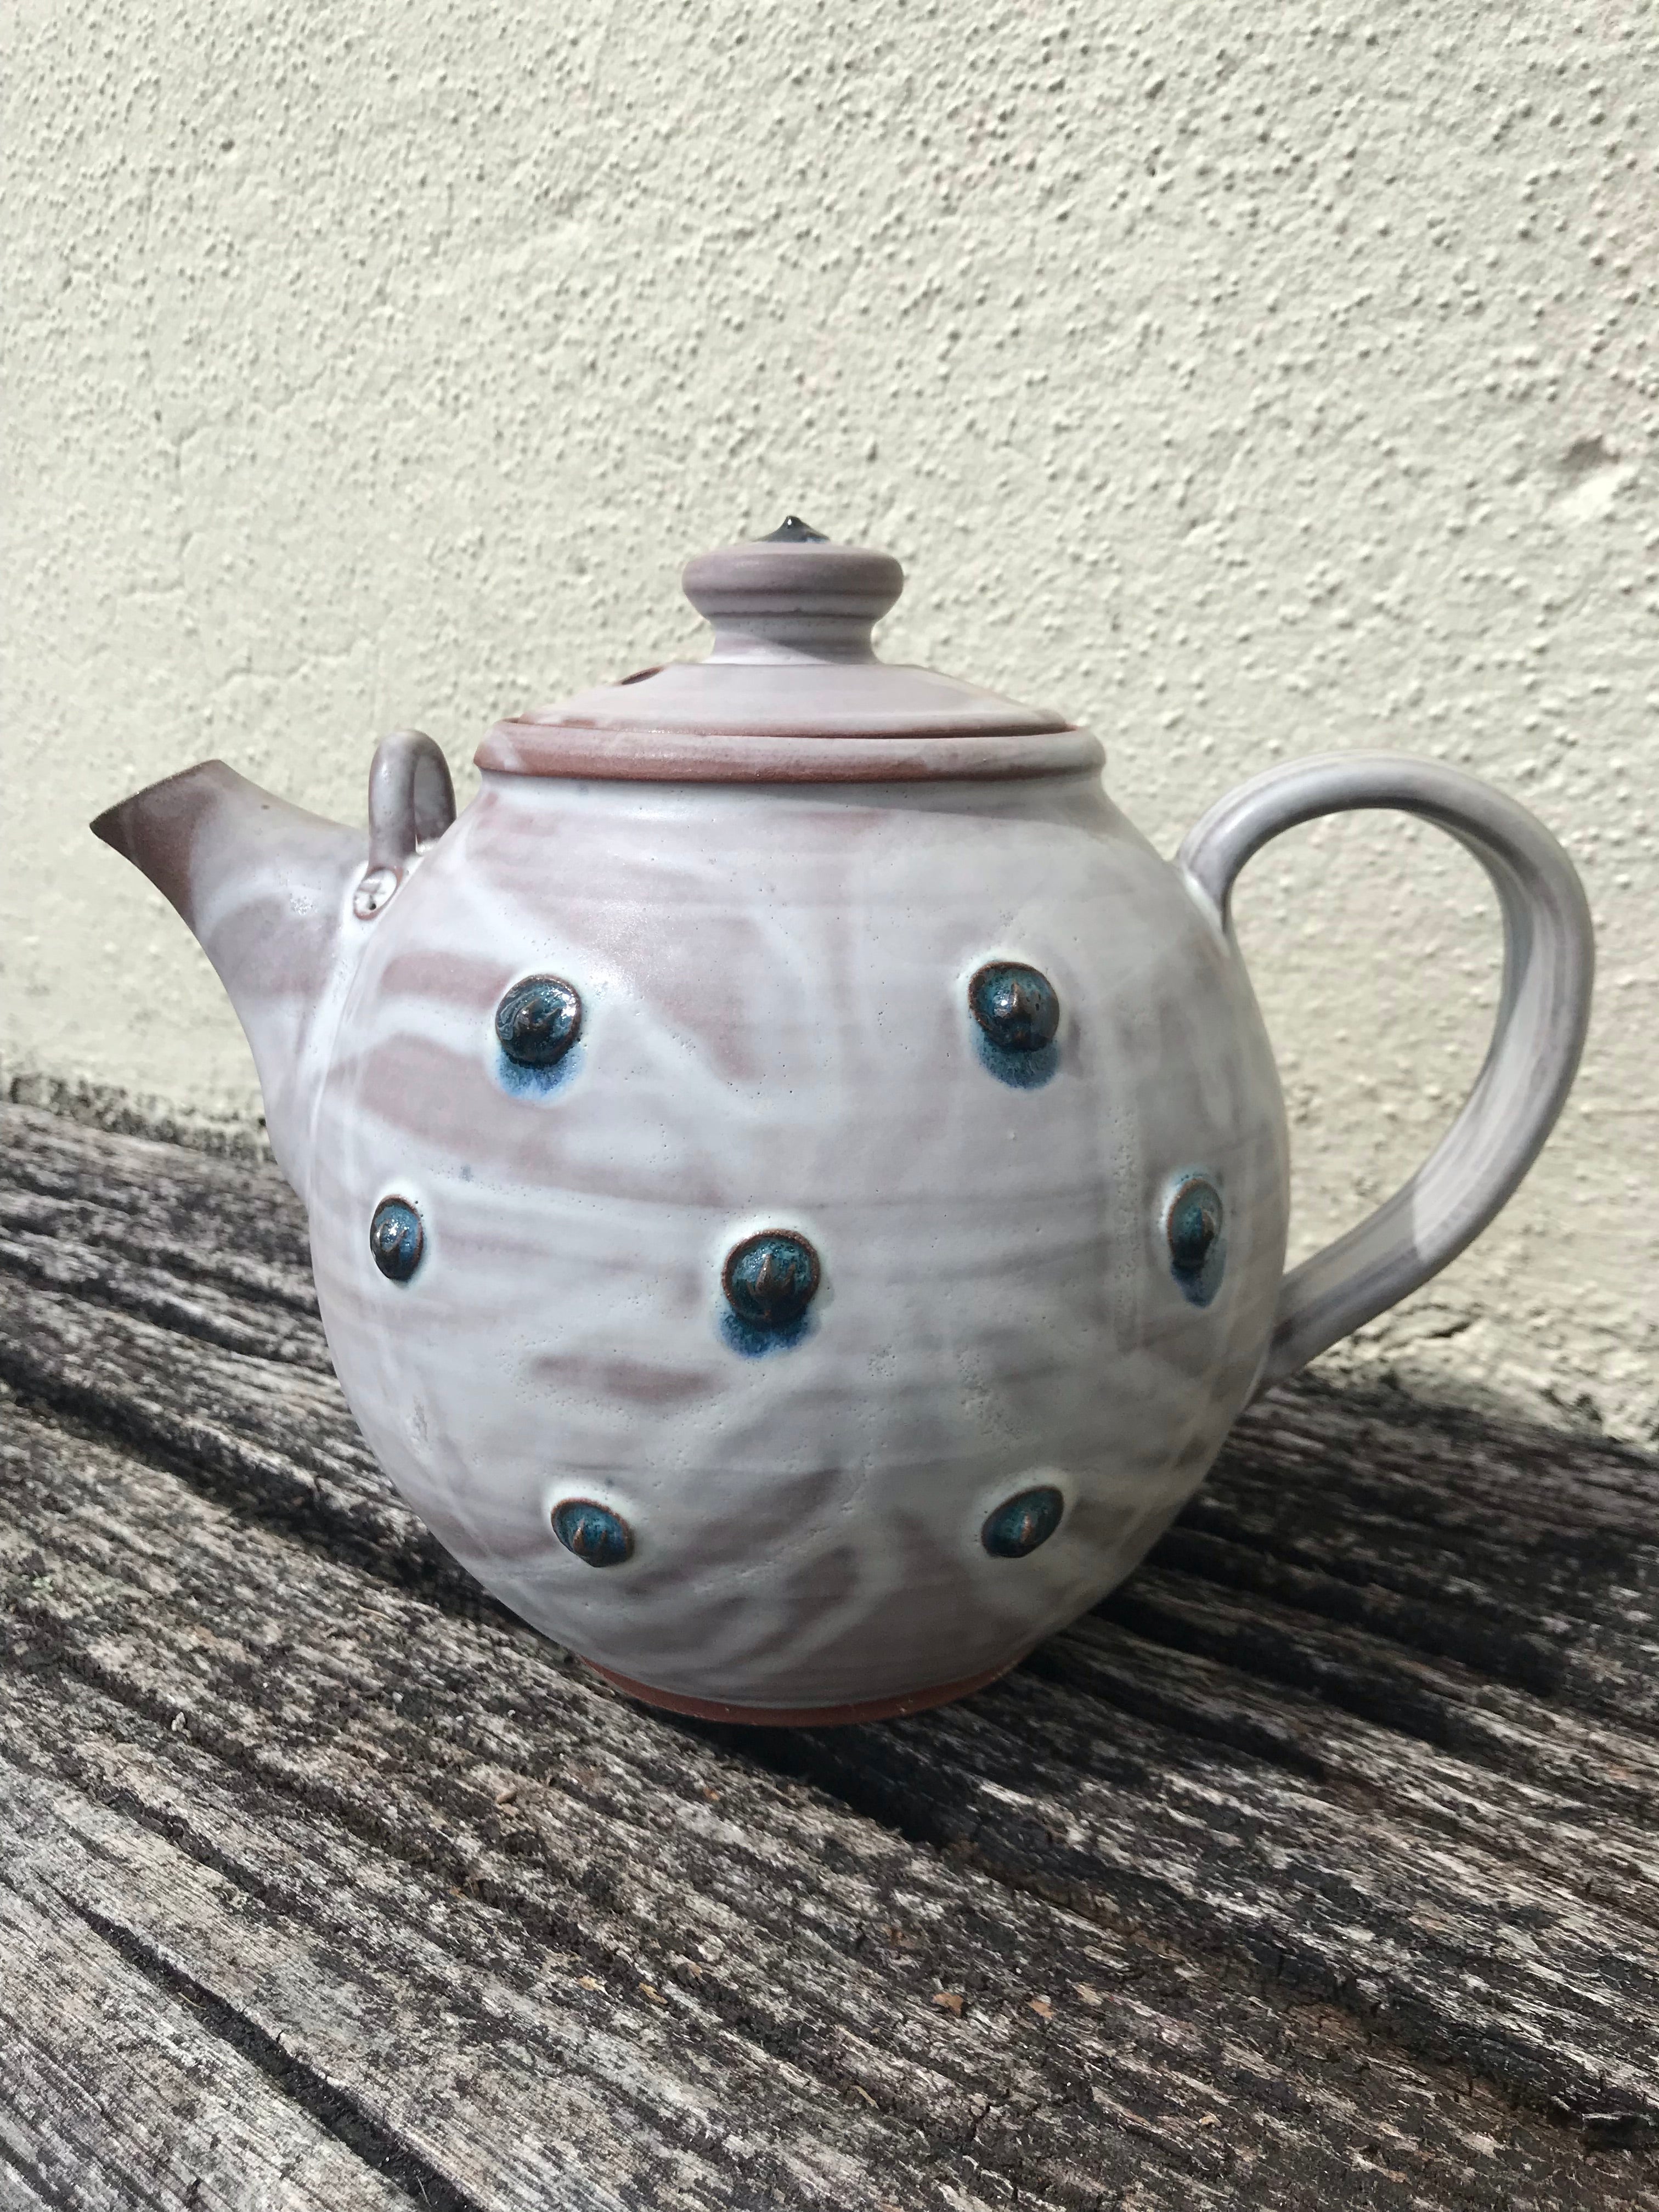 Large White Teapot with Tulip Stamp